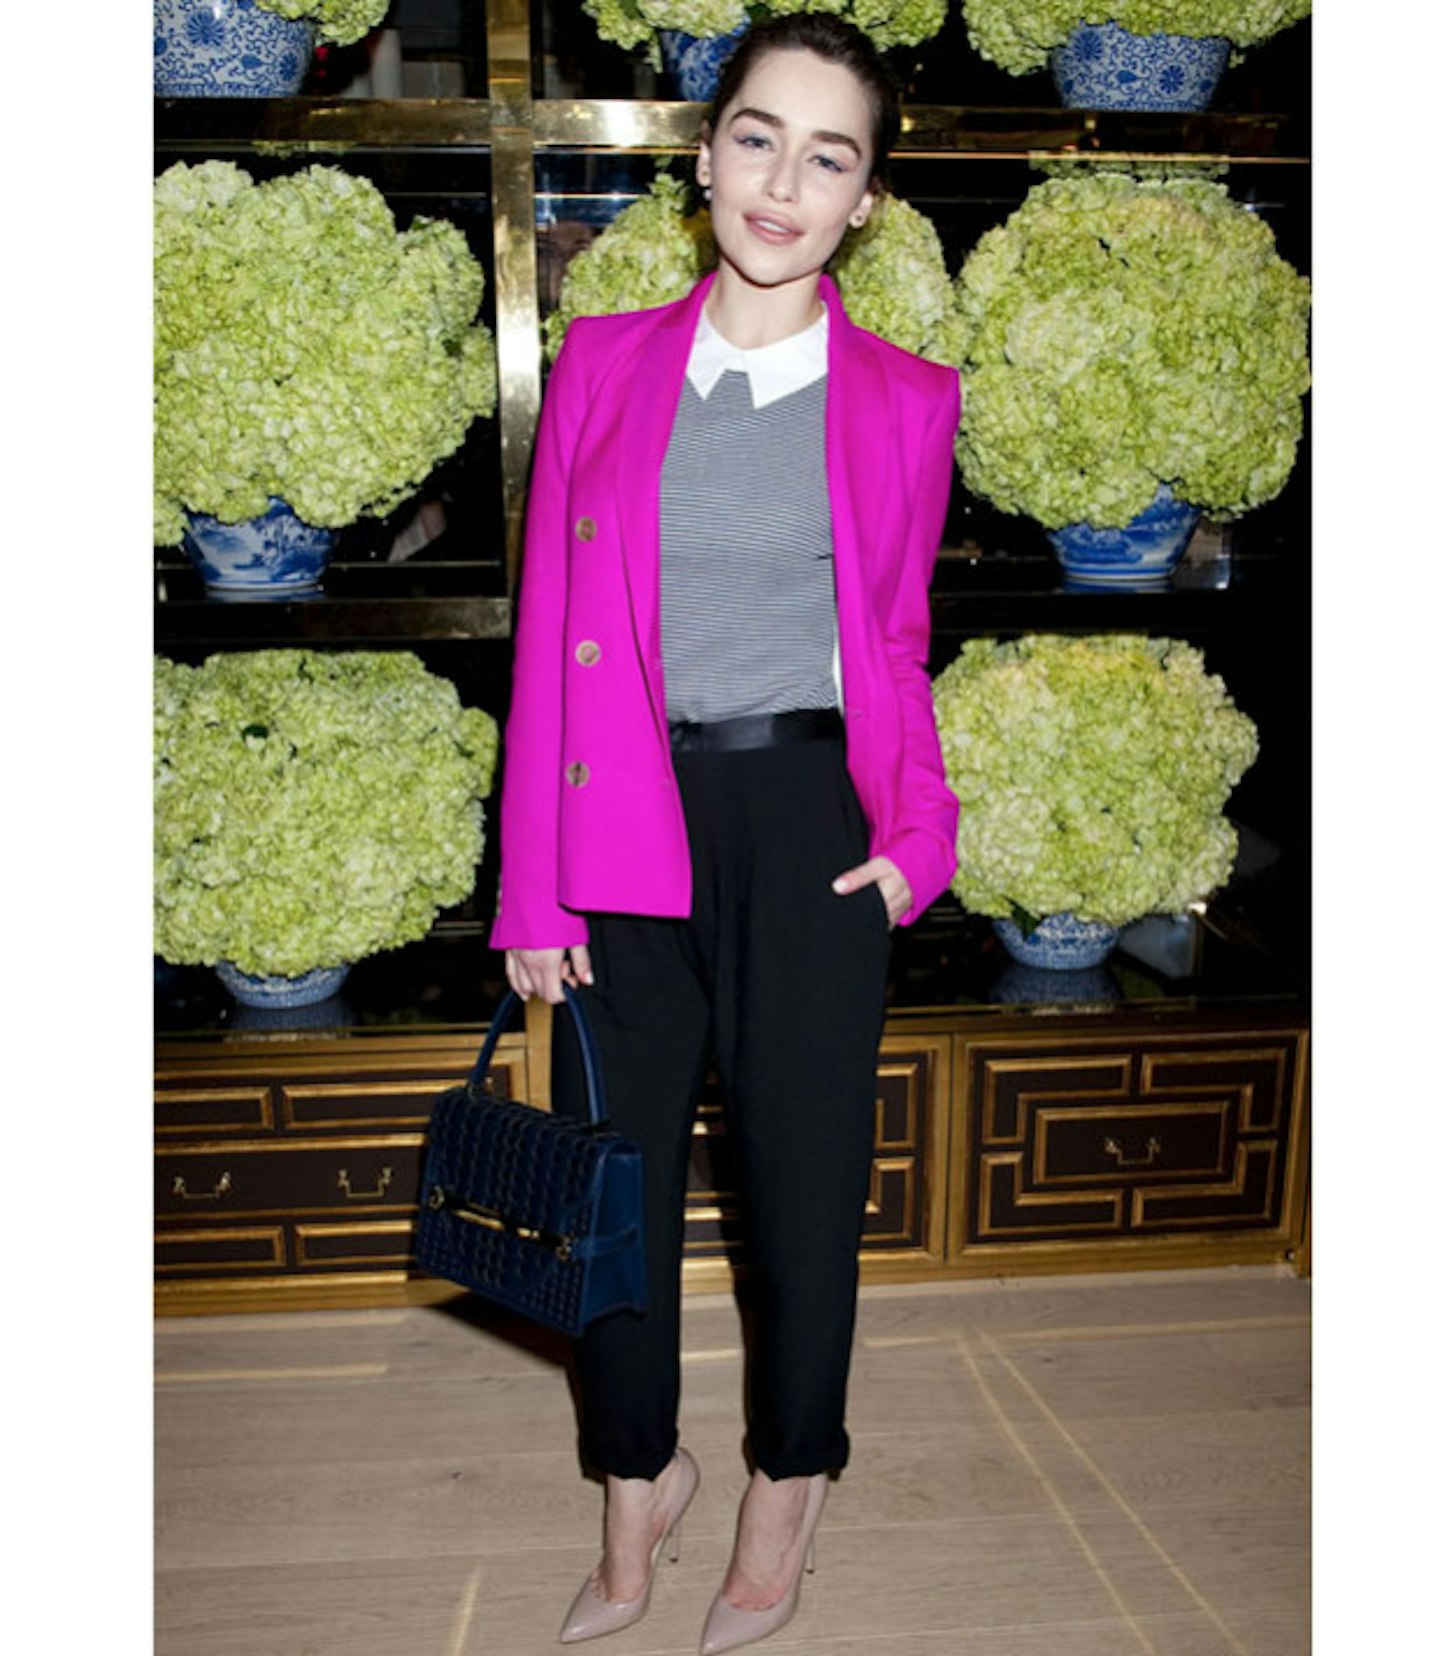 Colour popping in Tory Burch, Jan 2014